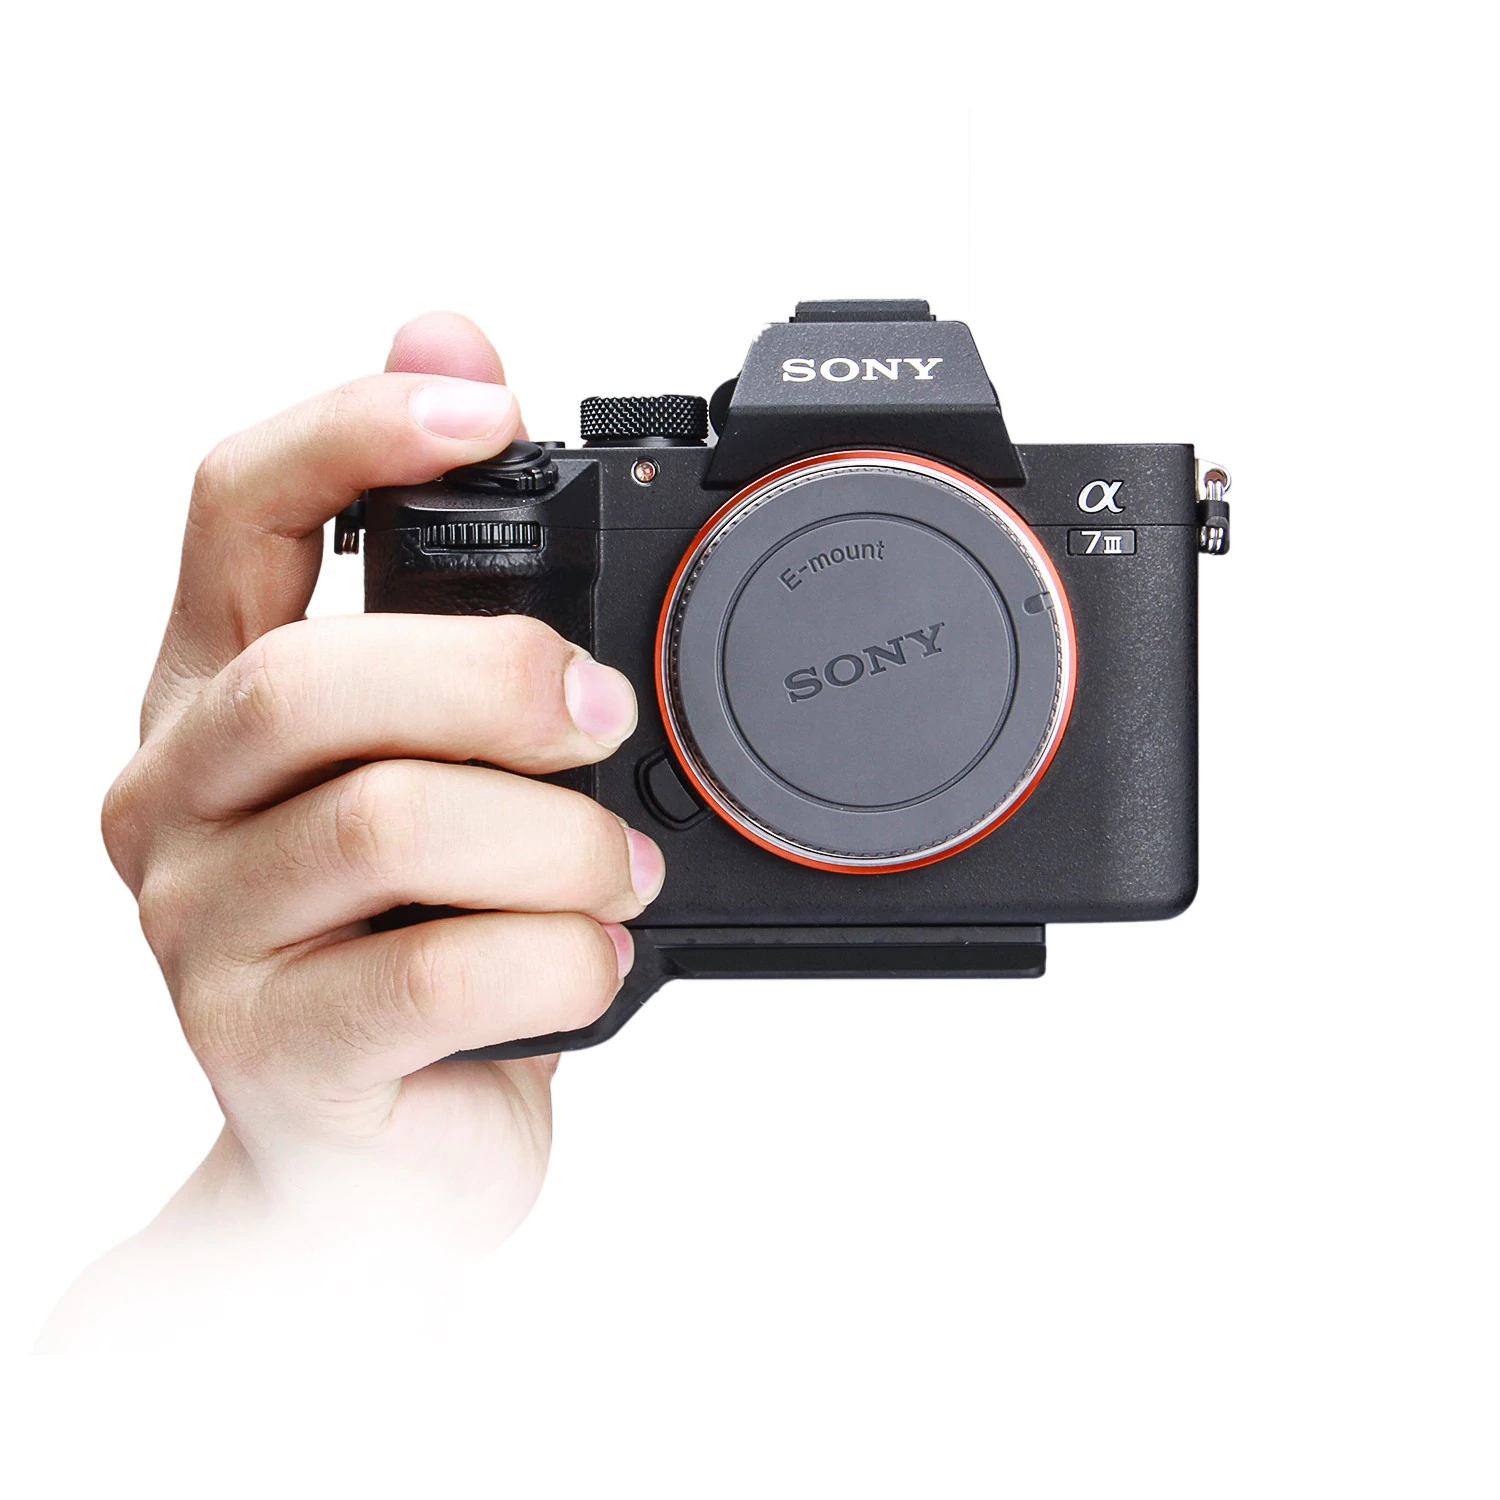 SHUTTER B GRIP FOR SONY A7IV (VG-C4EM Replacement)